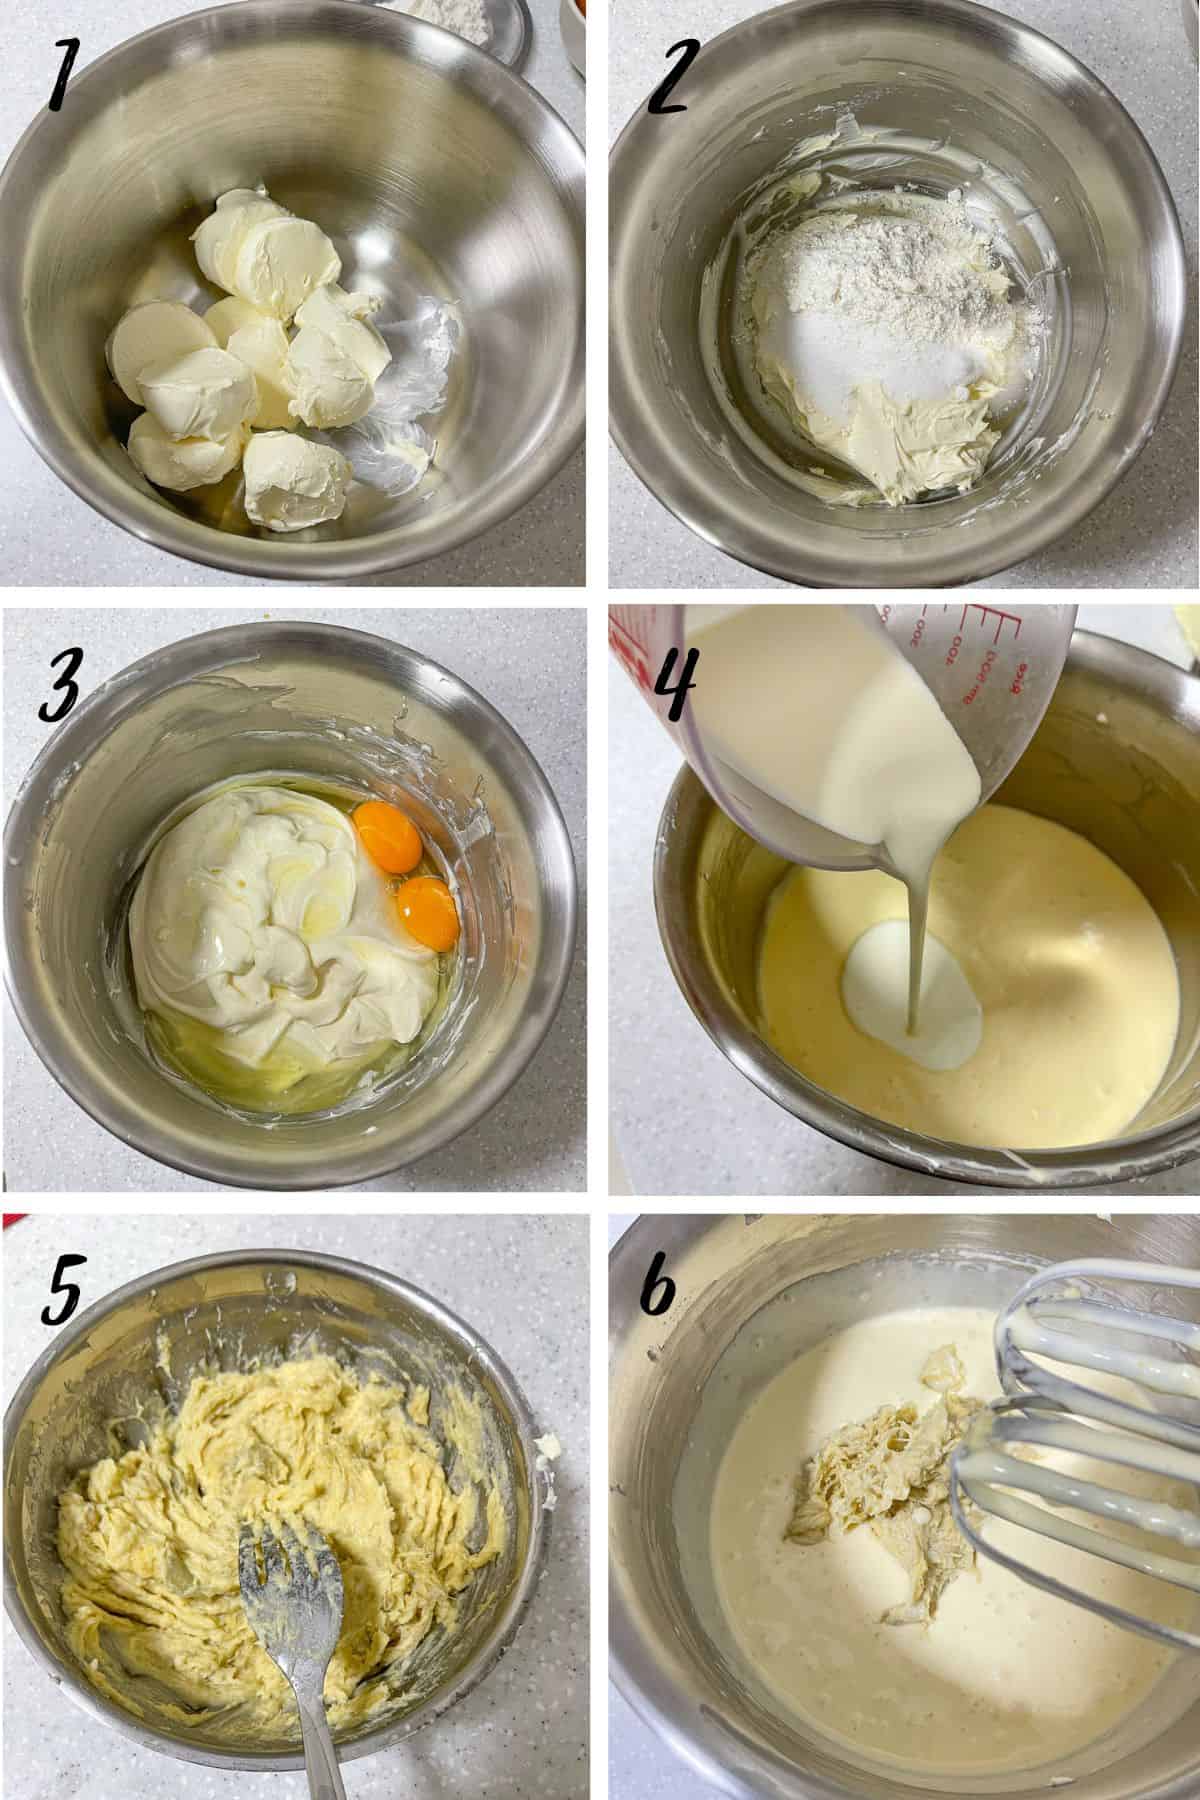 A poster of 6 images showing how to mix durian cheesecake batter.